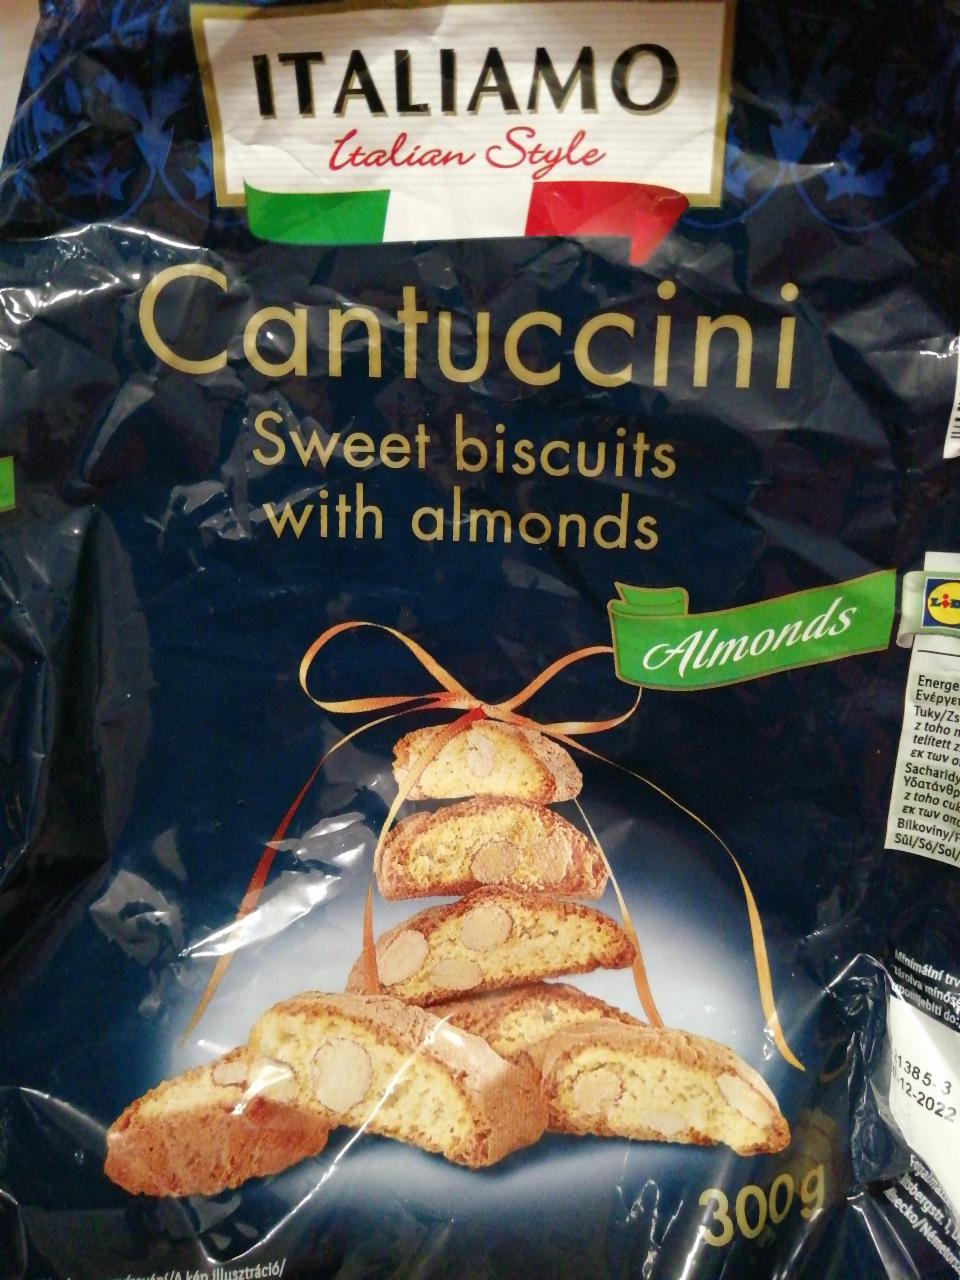 Fotografie - Cantuccini Sweet biscuits with almonds Italiamo